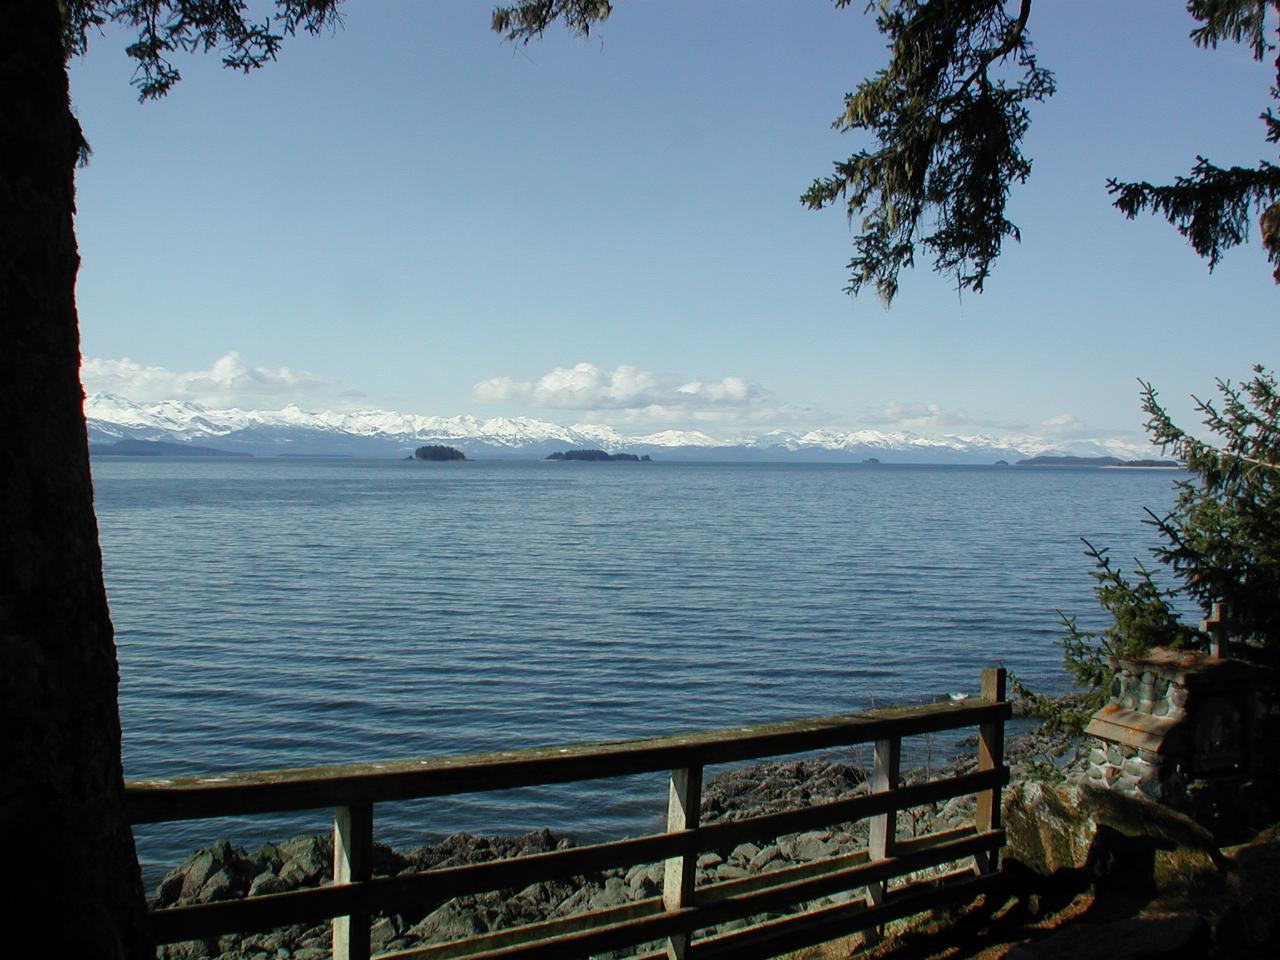 View across Gastineau Channel from Shrine of St. Terese